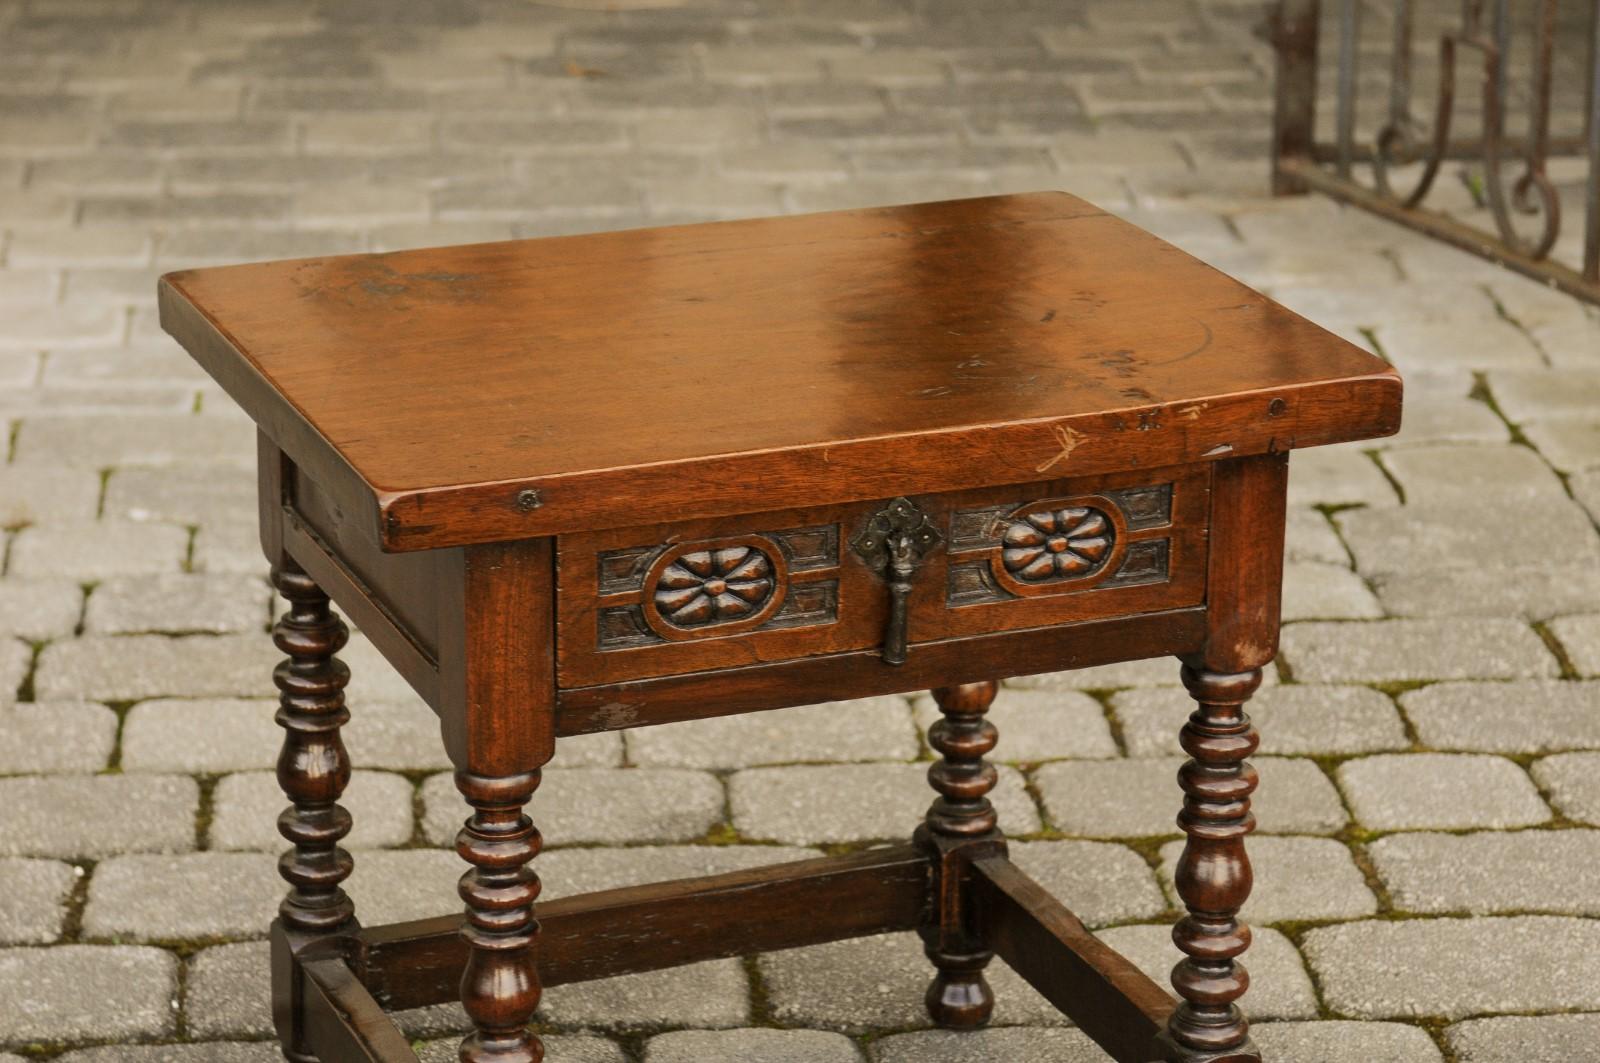 20th Century Italian 1900s Walnut Side Table with Drawer, Carved Rosettes and Turned Legs For Sale